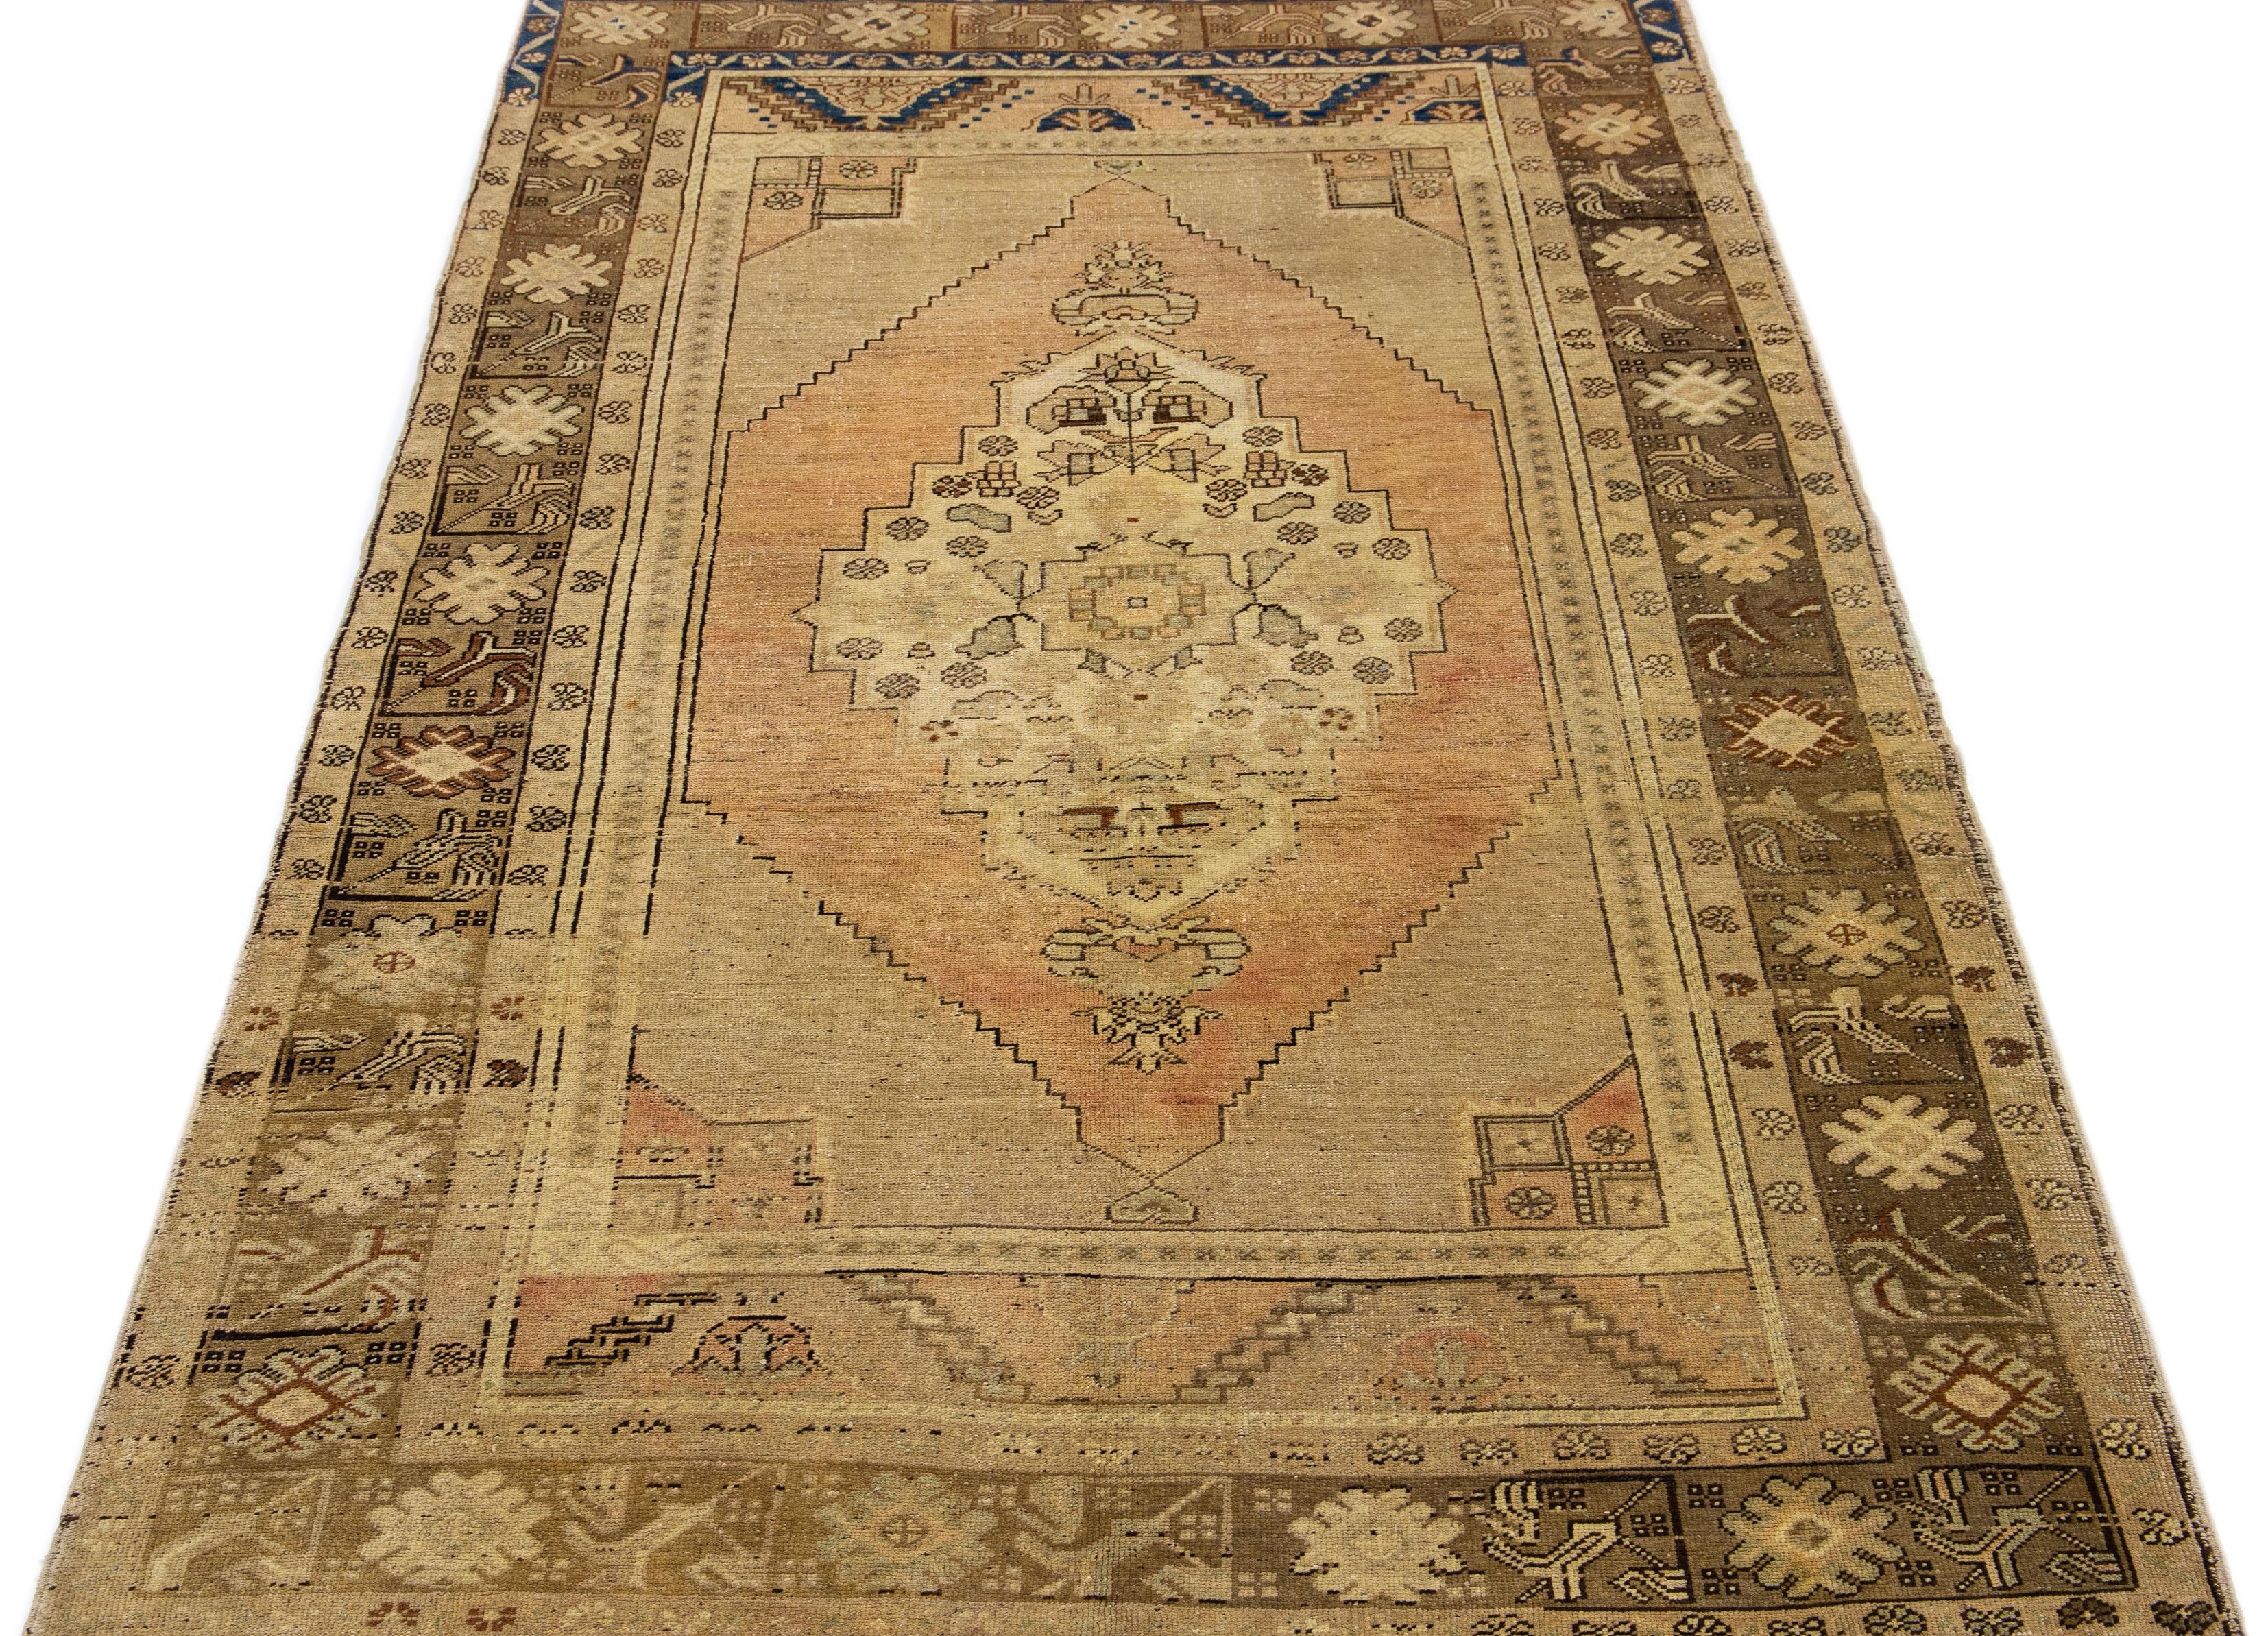 Beautiful vintage Khotan Hand-knotted wool rug with a beige field. This Khotan rug has rust and brown accents in a gorgeous all-over medallion design.

This runner measures 4'10